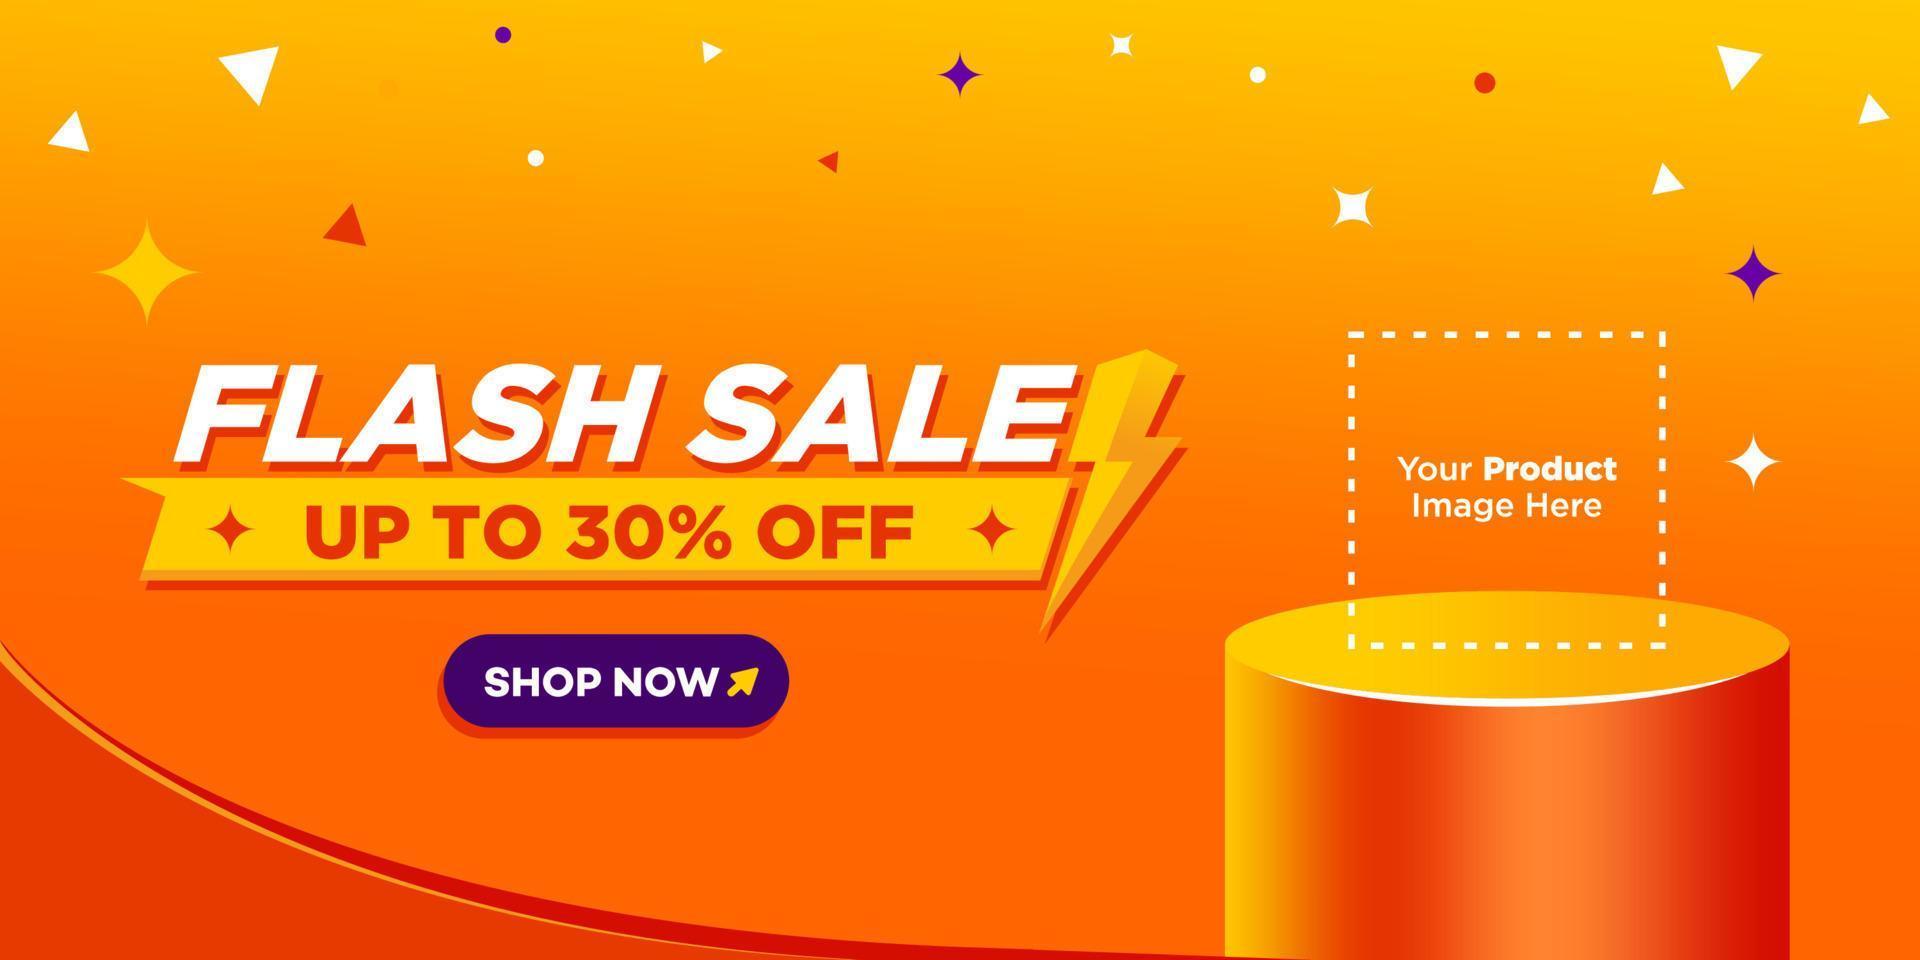 Flash sale banner with orange podium scene with lightning symbol icon. flash Sale online shopping banner template design for social media and website vector